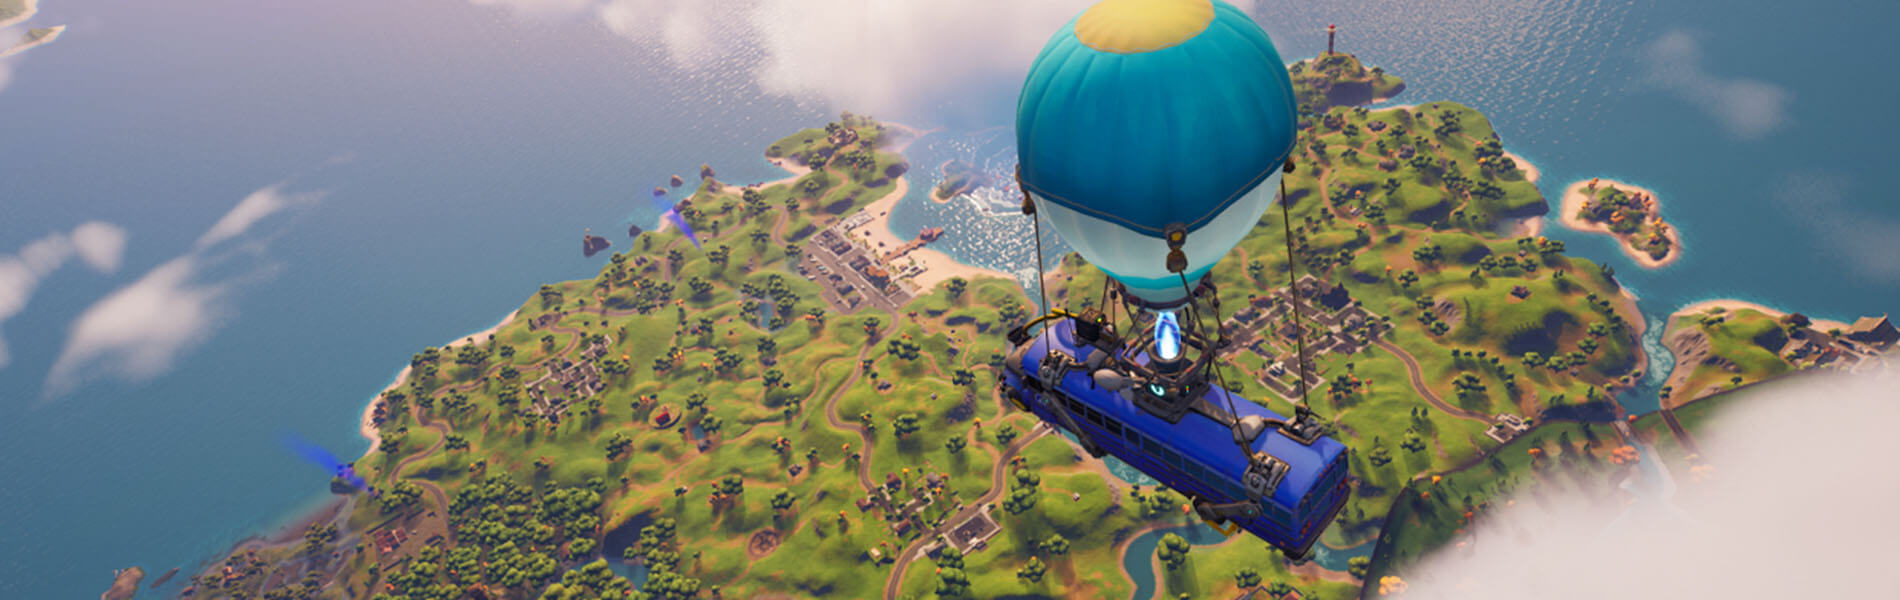 Fortnite will become less productive on epic settings in Chapter 2 Season 7 